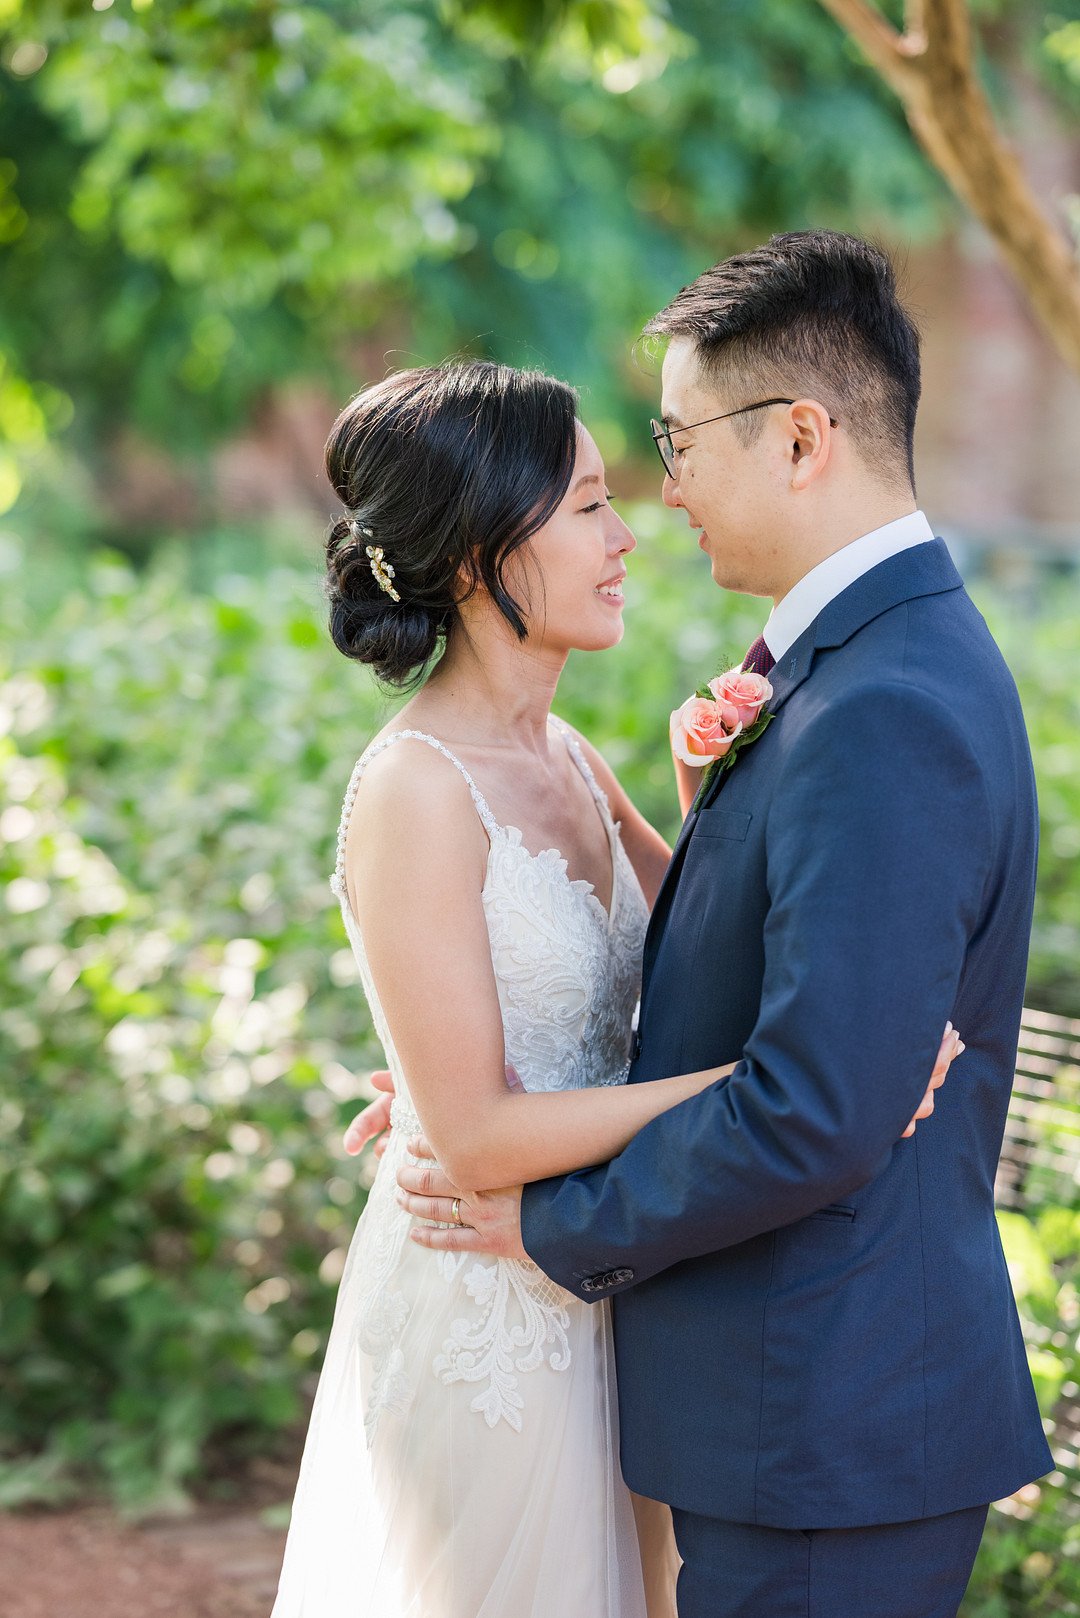 Chan_Chan_Winterlyn Photography_GLESSNER HOUSE CHICAGO WEDDING-73_low.jpg